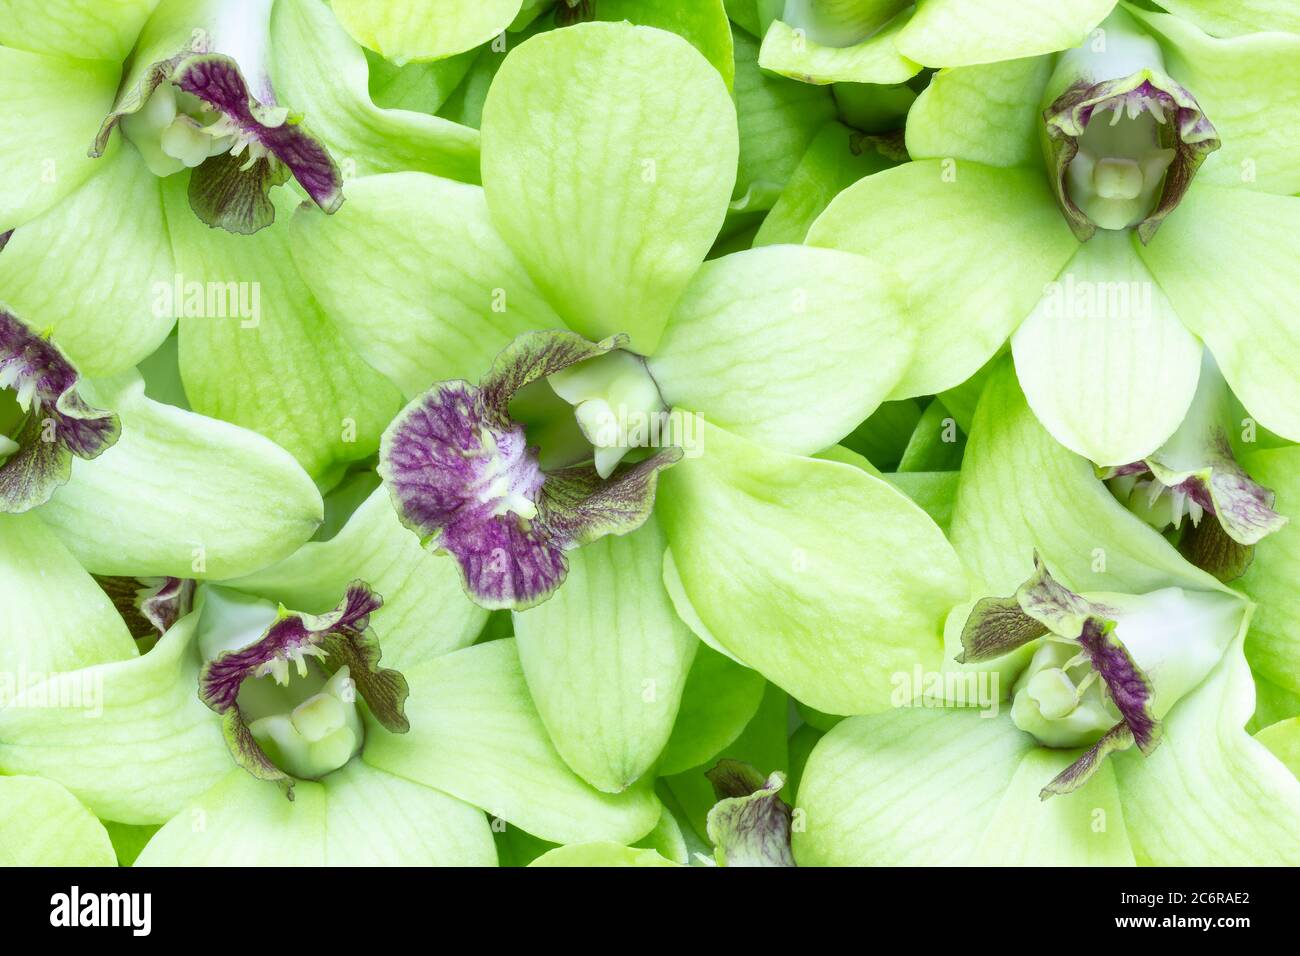 Close up floral background image of green dendrobium orchids. Stock Photo